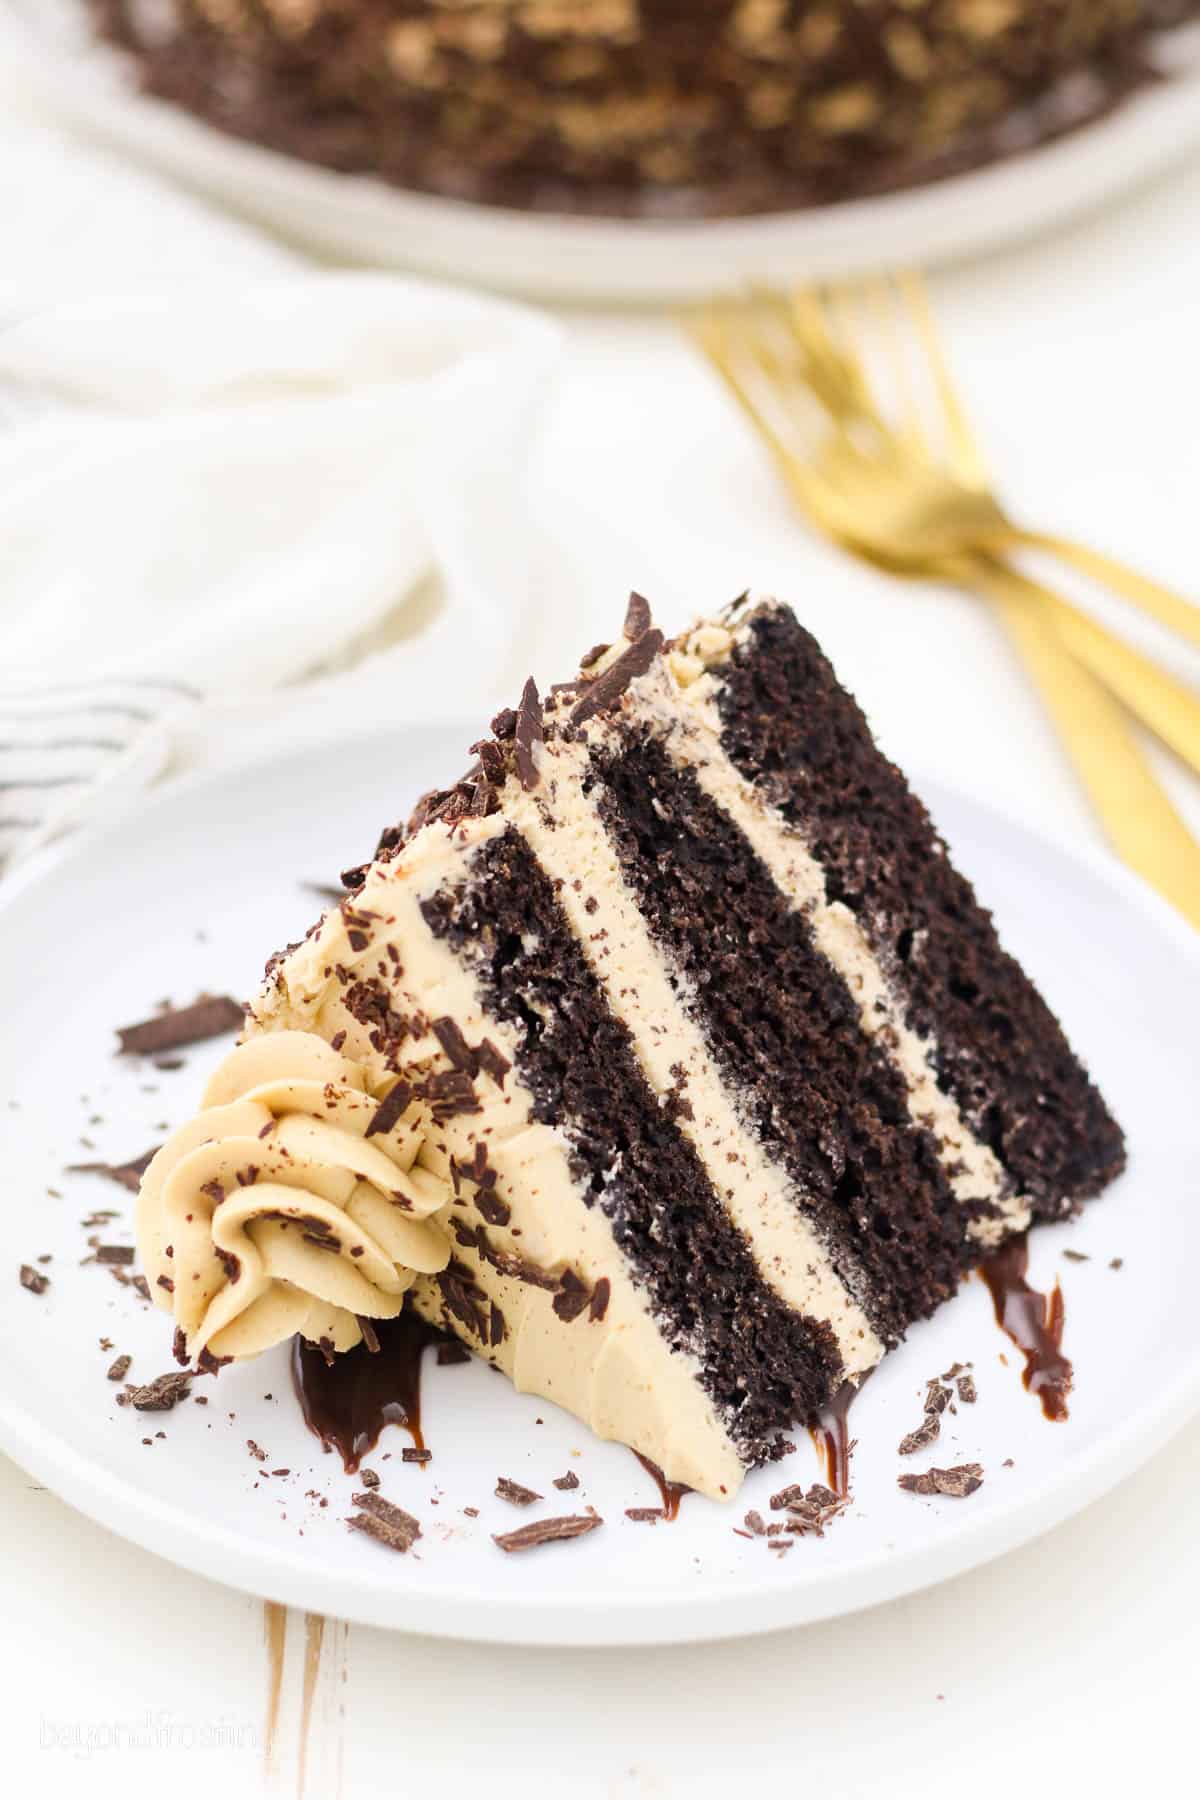 A slice of frosted 3-layer chocolate mocha cake laying on its side on a white plate.